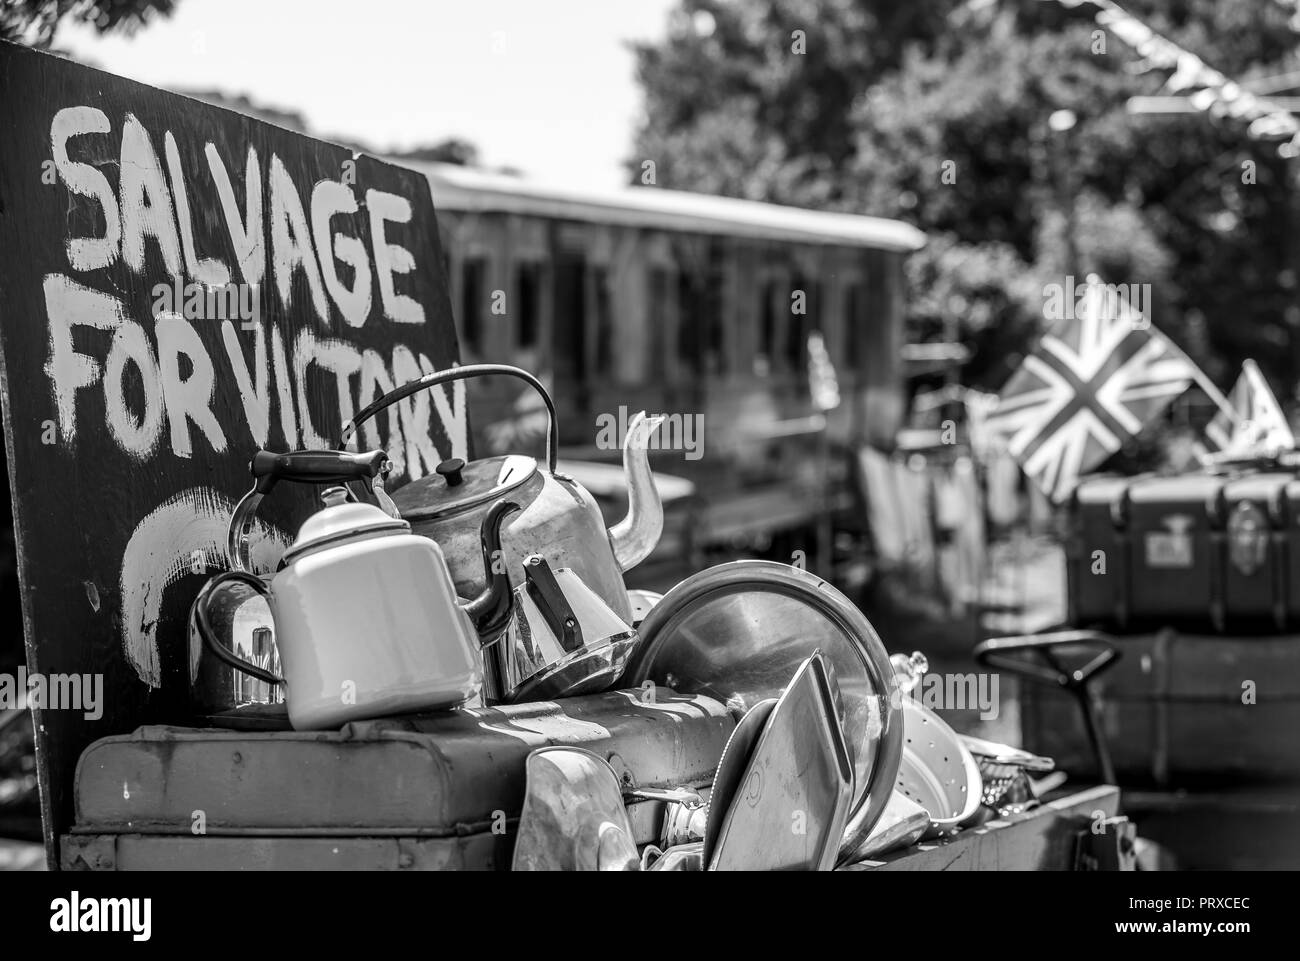 Black & white close up, Salvage for Victory sign & old metal tea pots, kettles pots & pans. 1940's WW2 wartime event, Severn Valley Railway, summer. Stock Photo